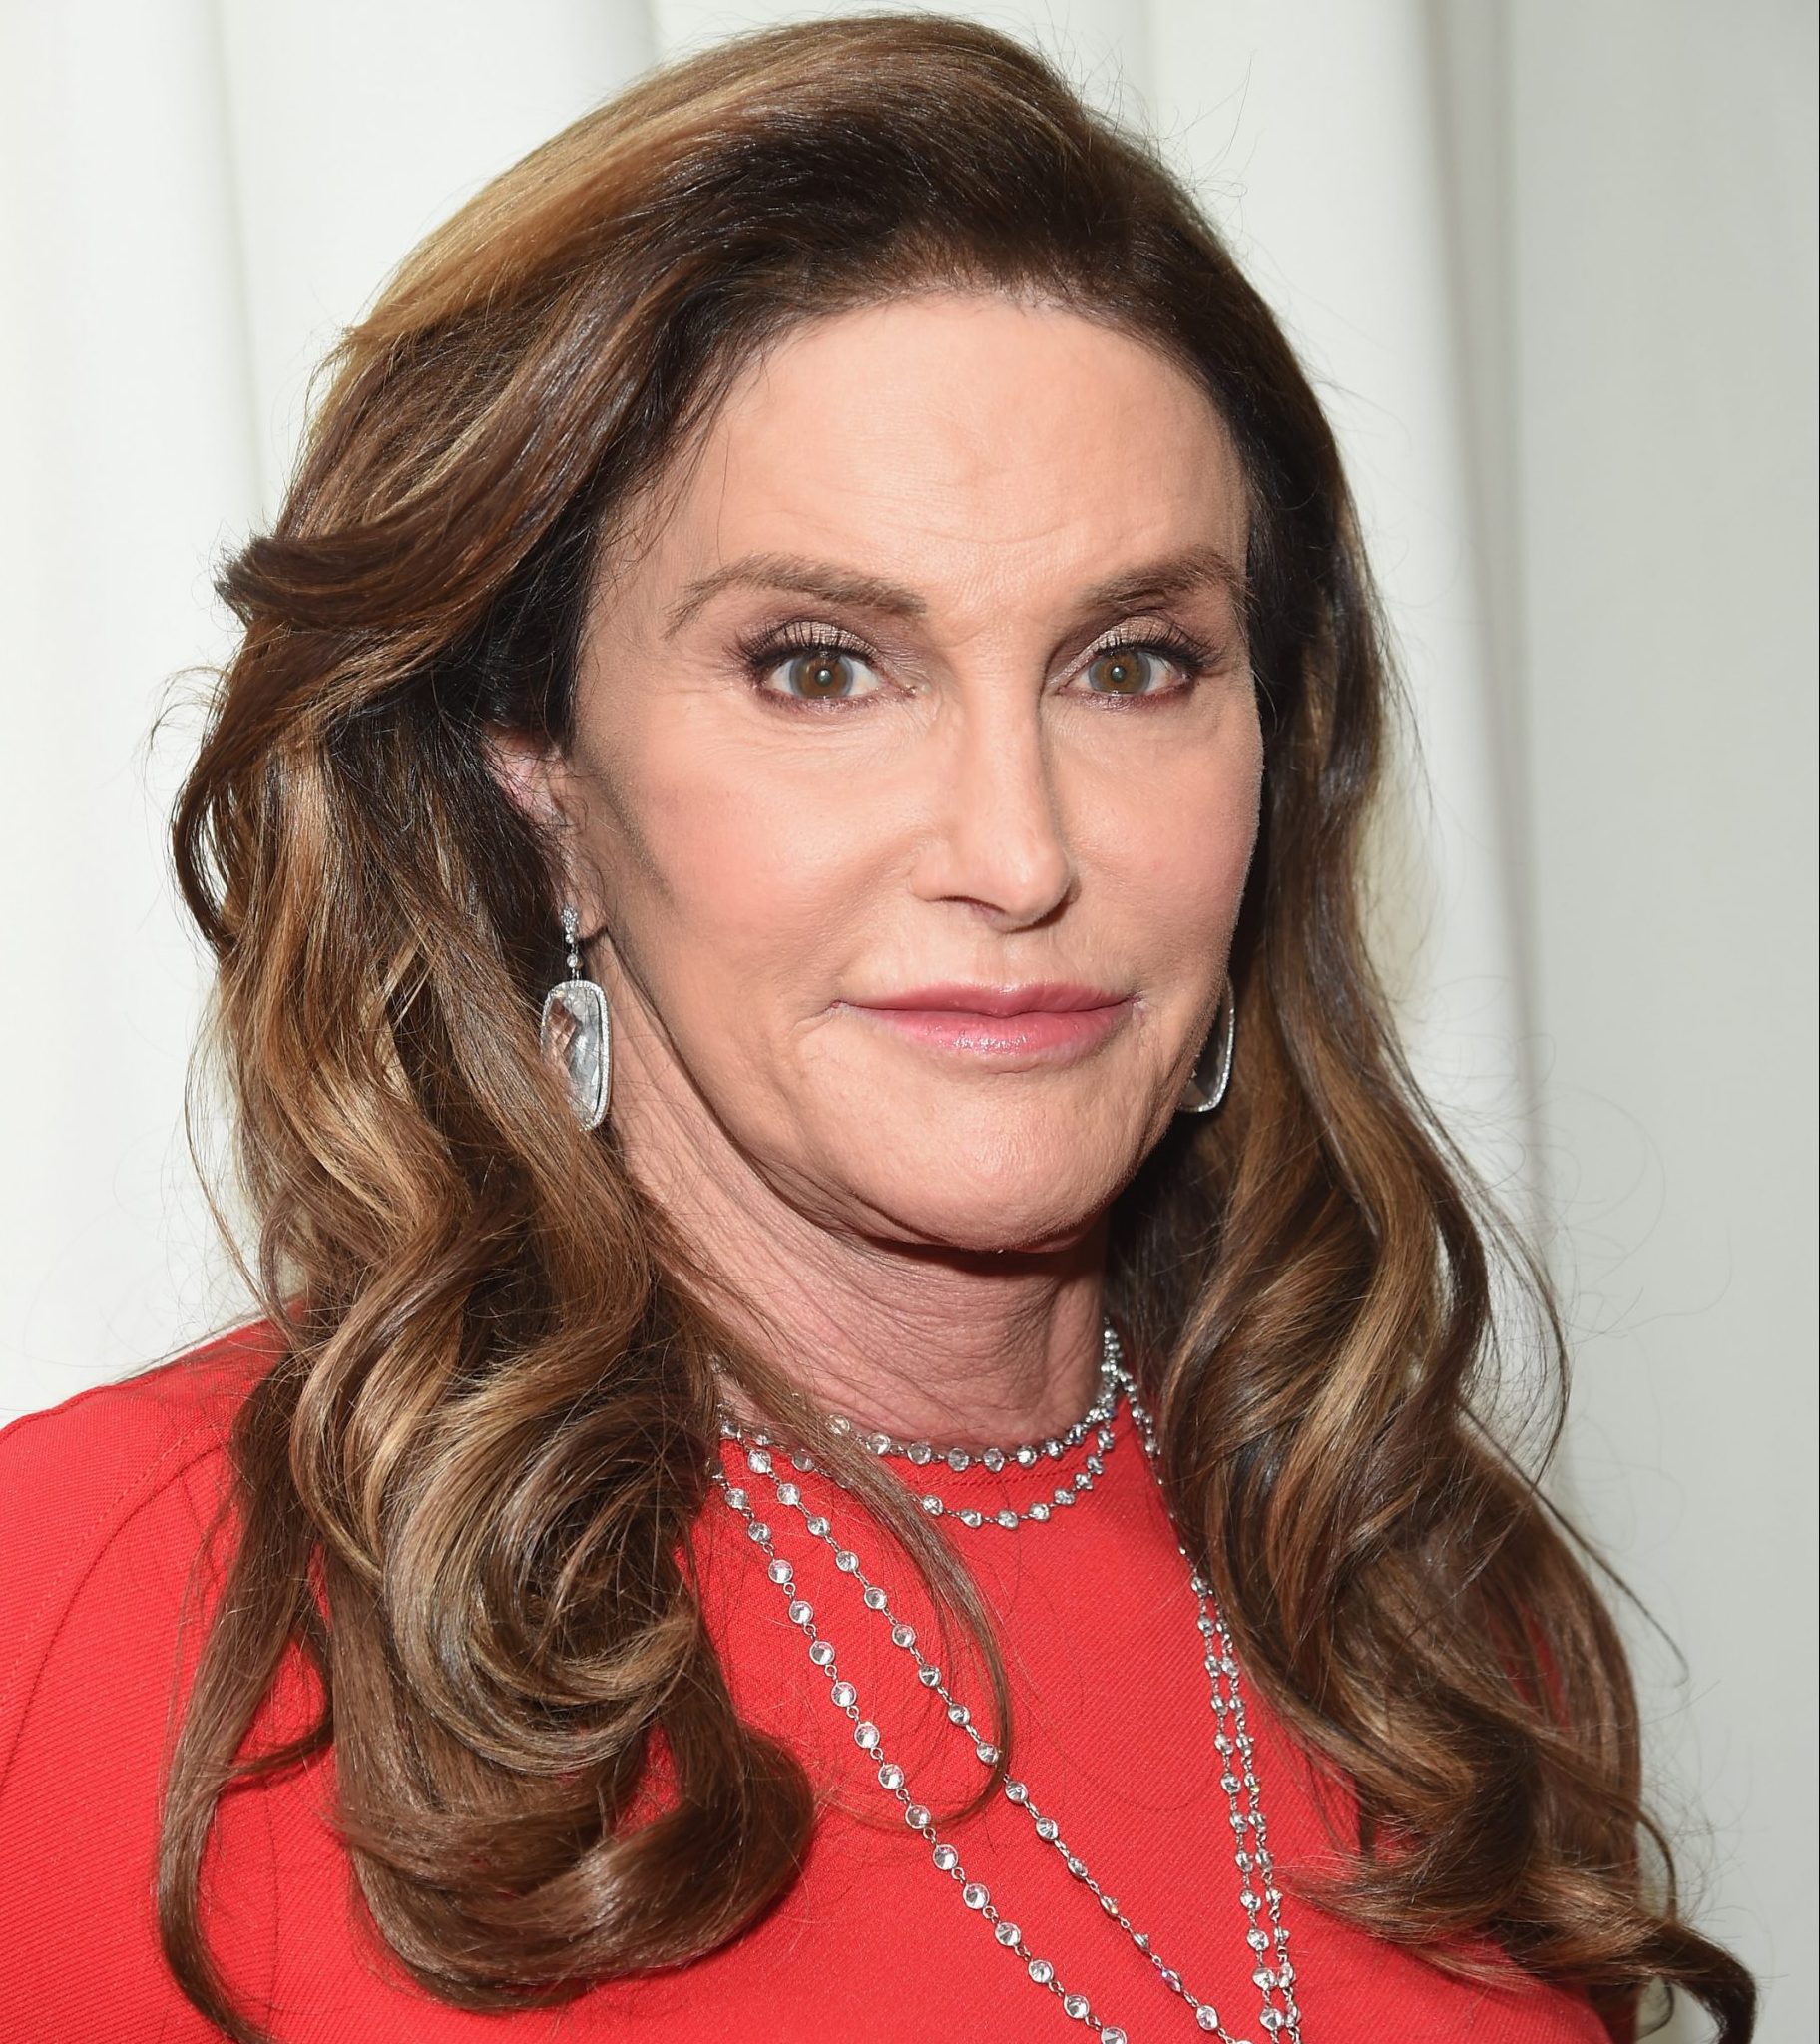 Caitlyn Jenner - California governor